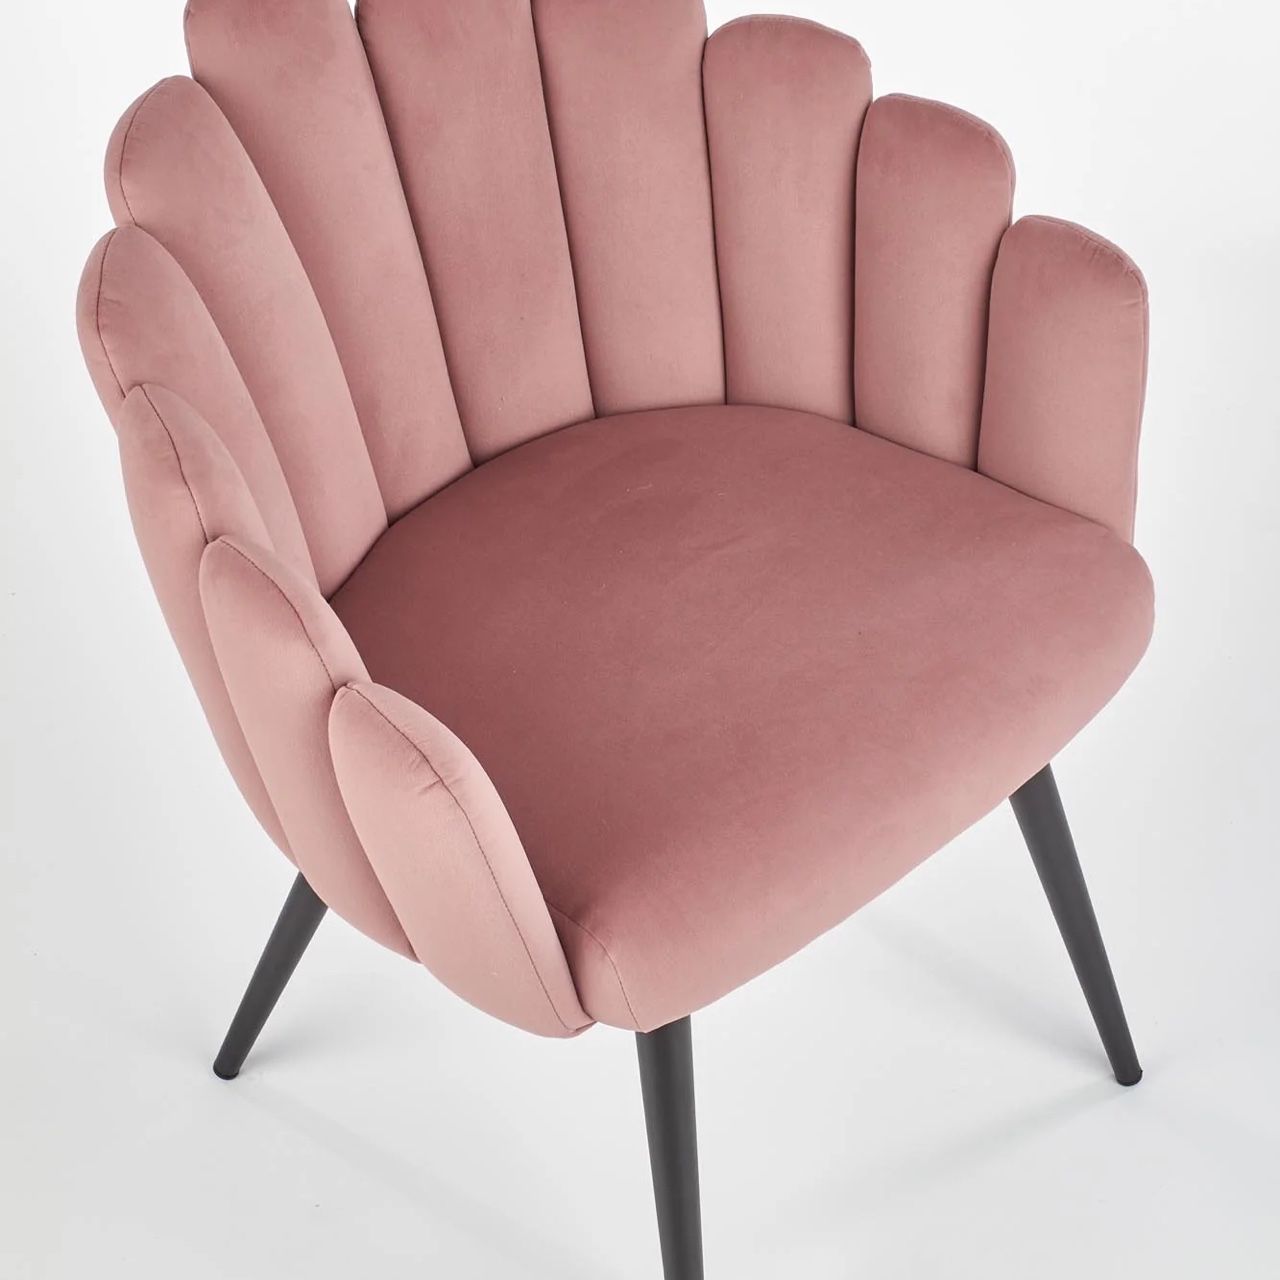 CHAIR PINK $170